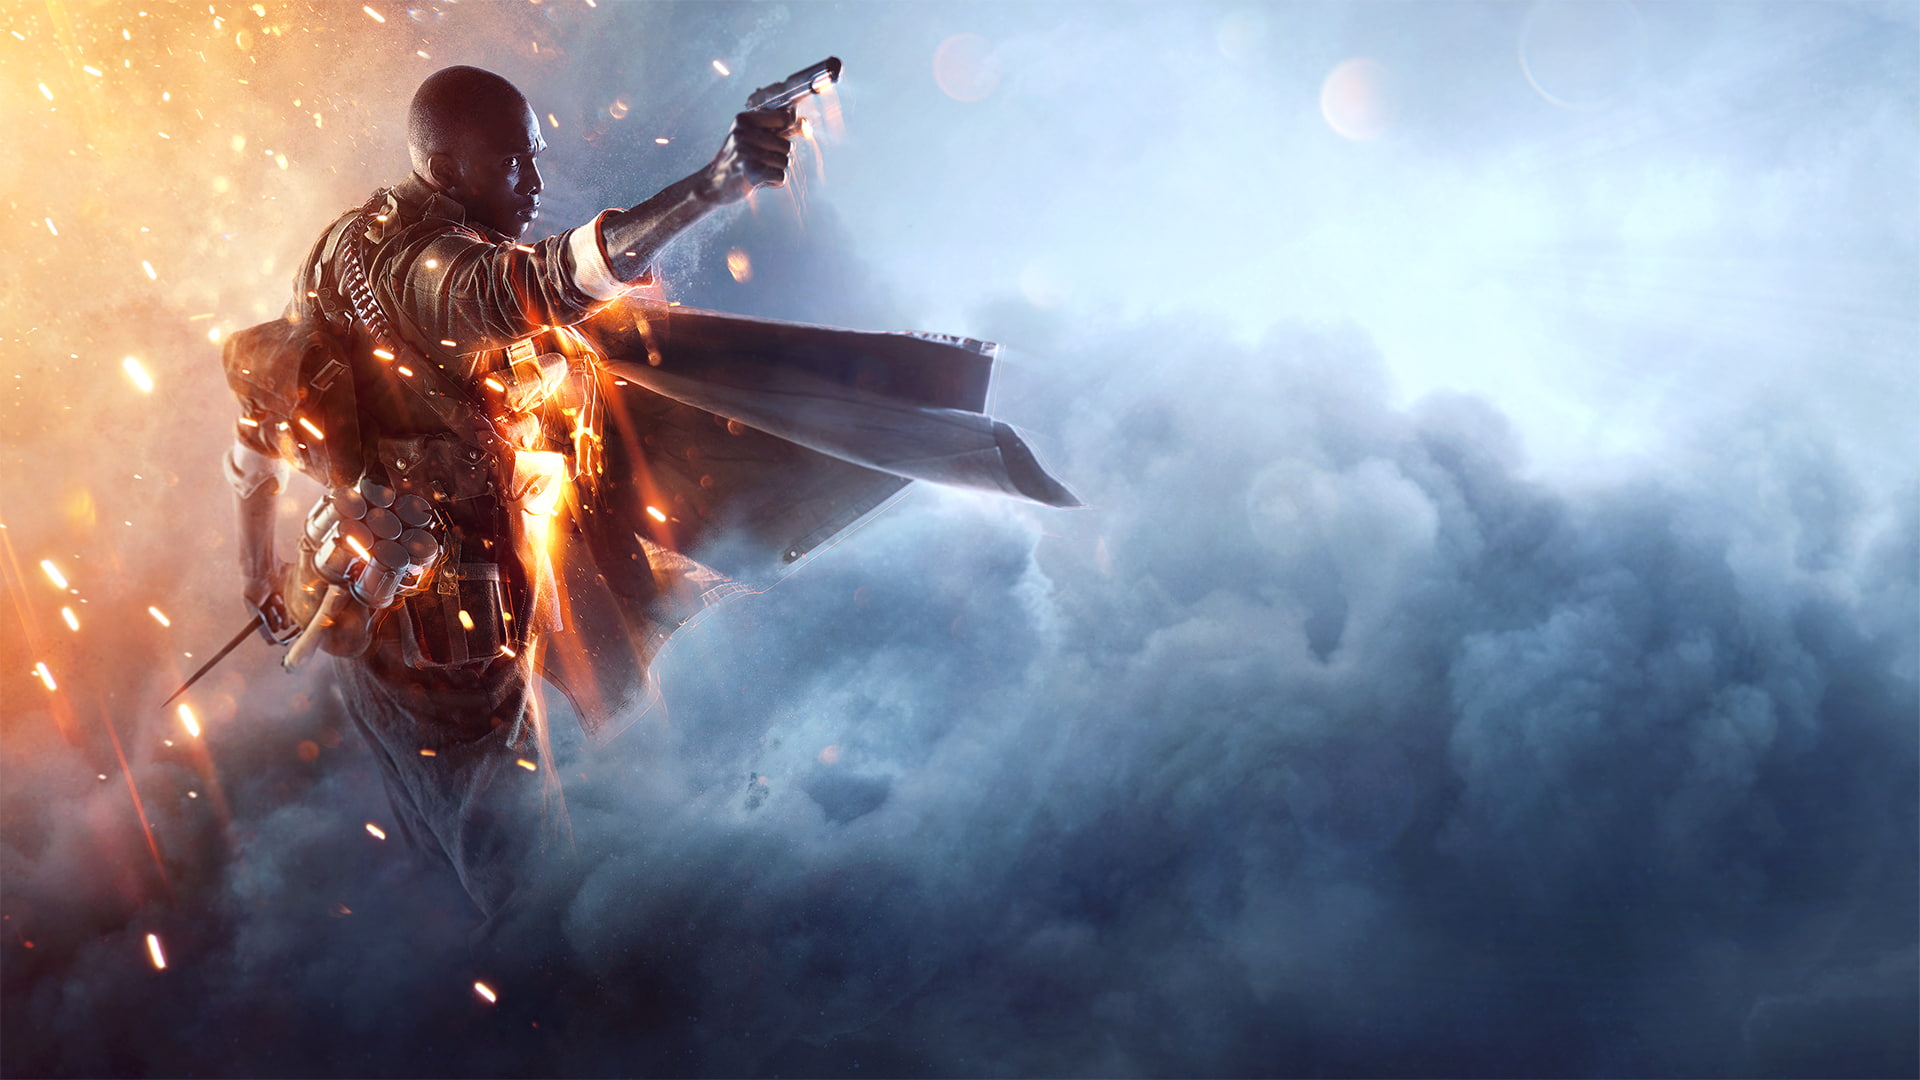 man character graphic wallpaper, Battlefield 1, Ultimate Edition